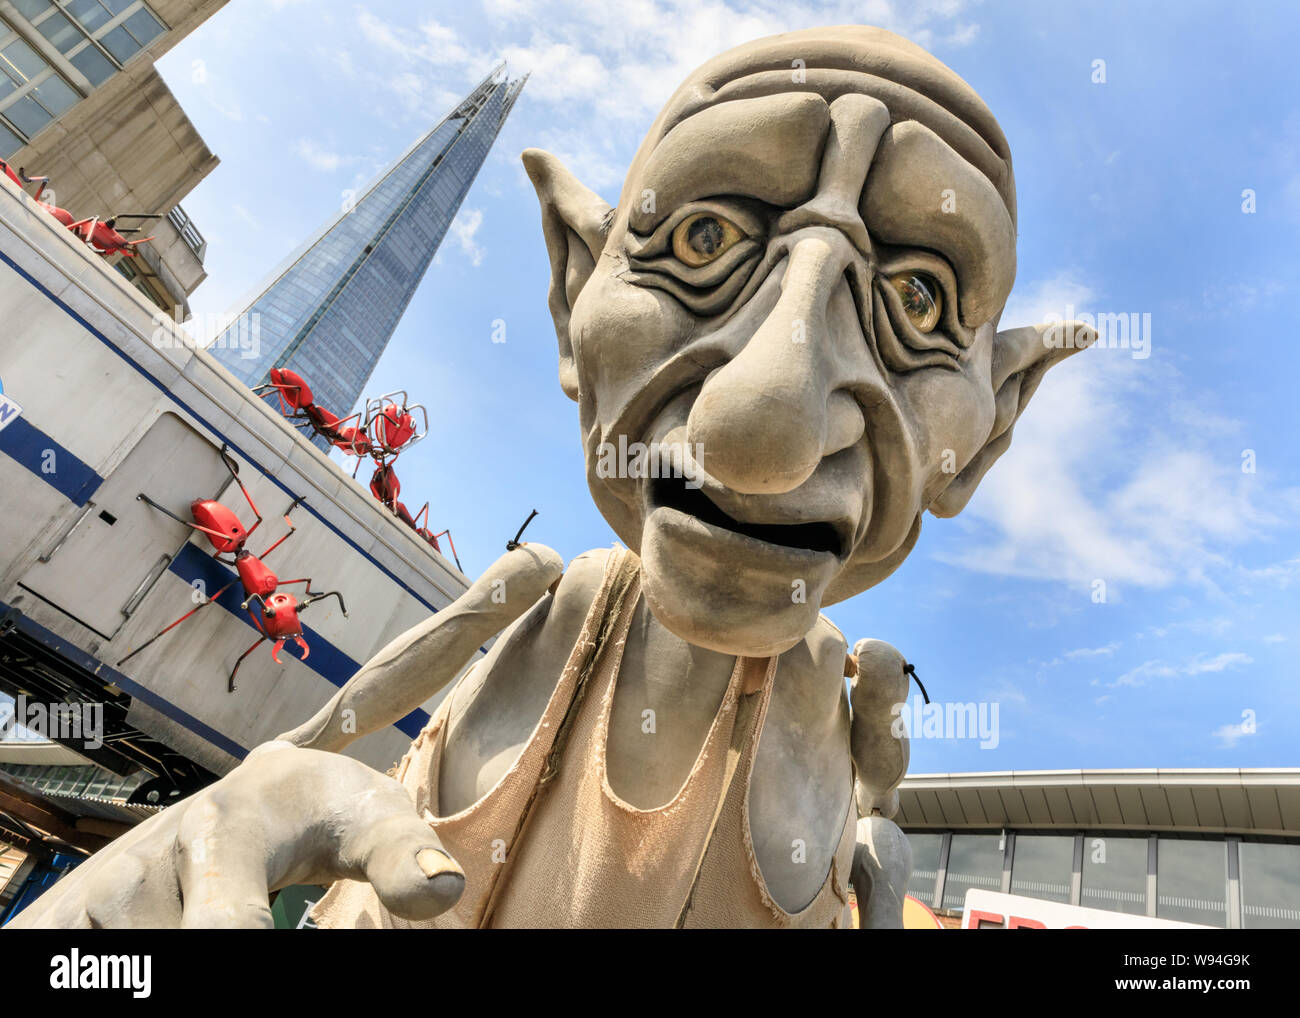 Gnomus, Caretaker of the Earth, a giant gentle green giant puppet by 'Puppets with Guts' puppeteers, performance outside near the Shard, London, UK Stock Photo